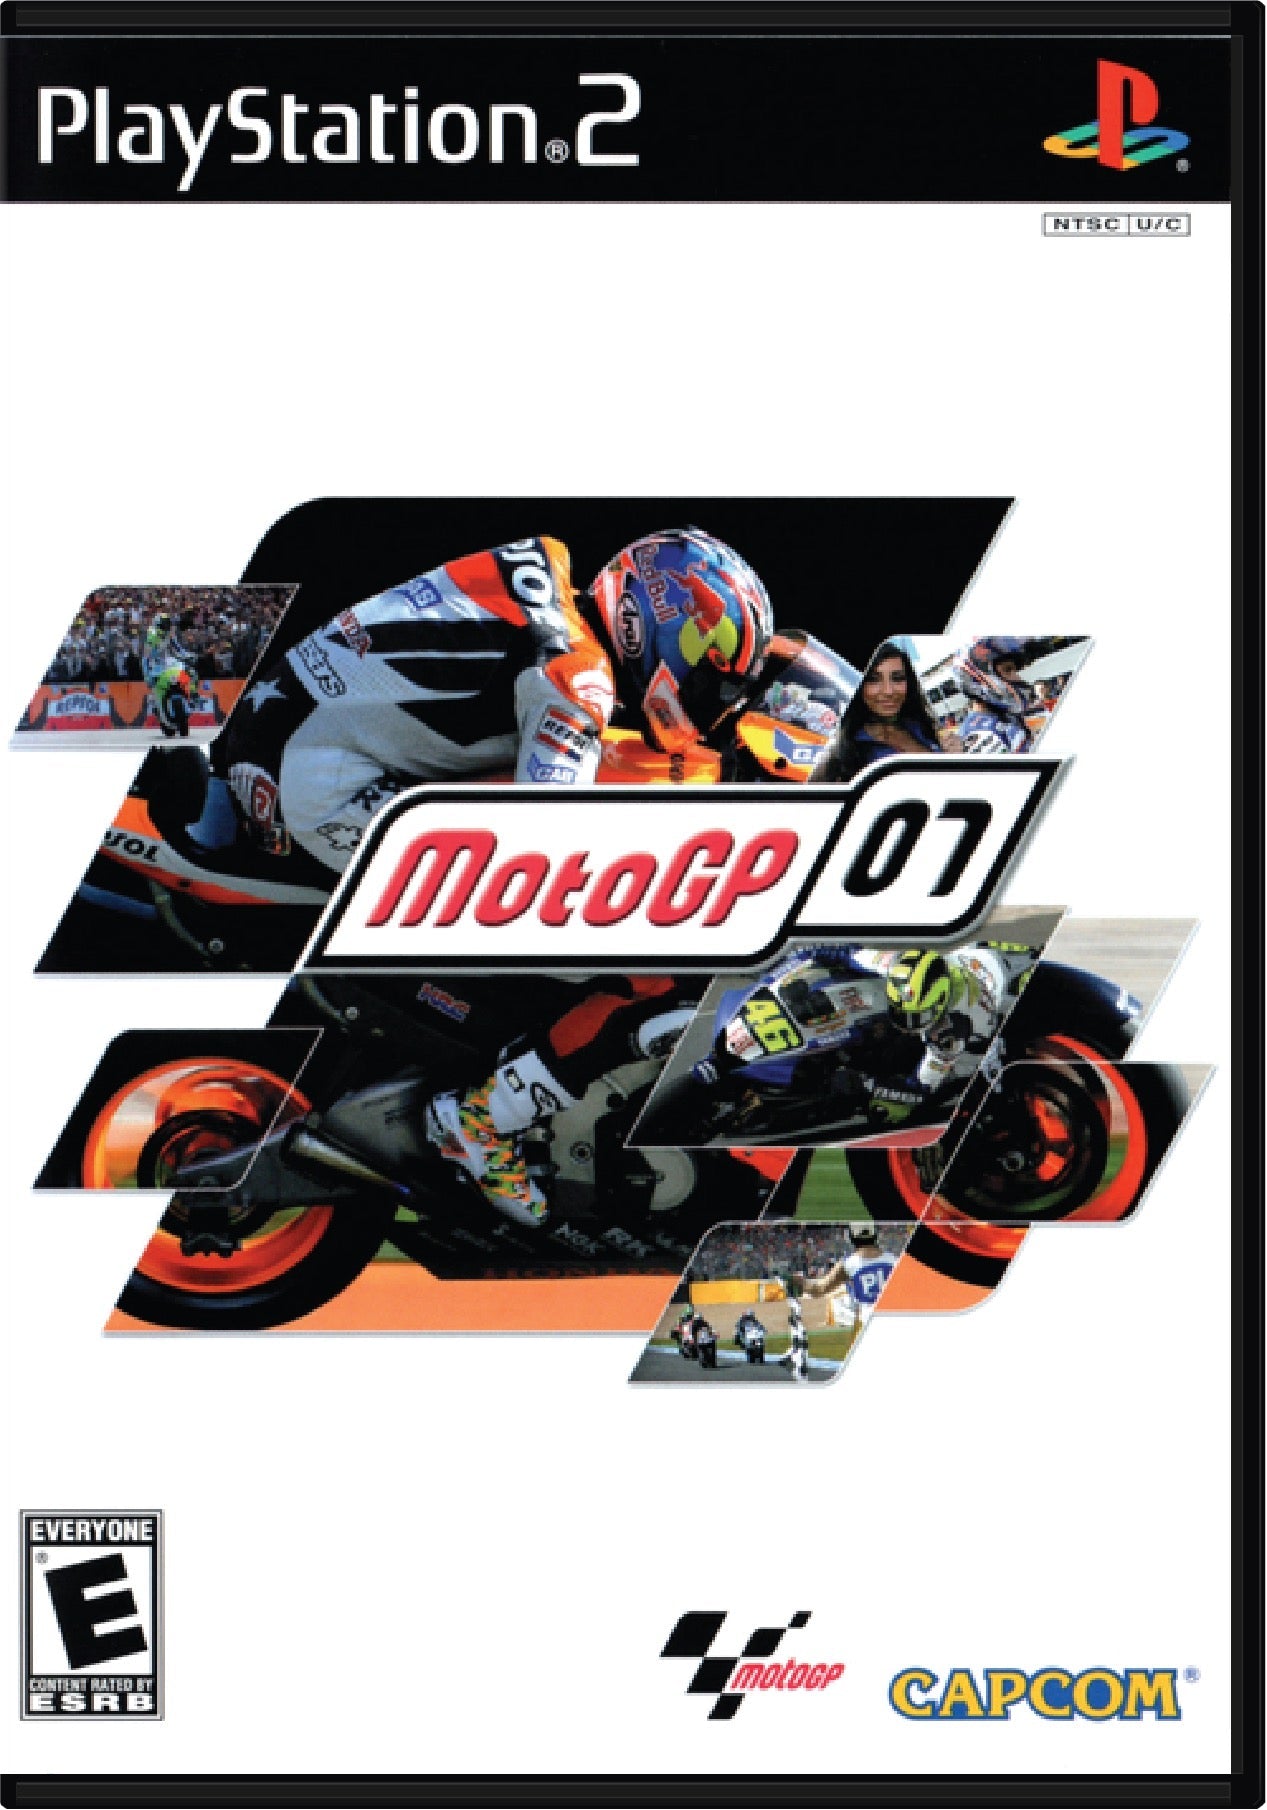 Moto GP 07 Cover Art and Product Photo